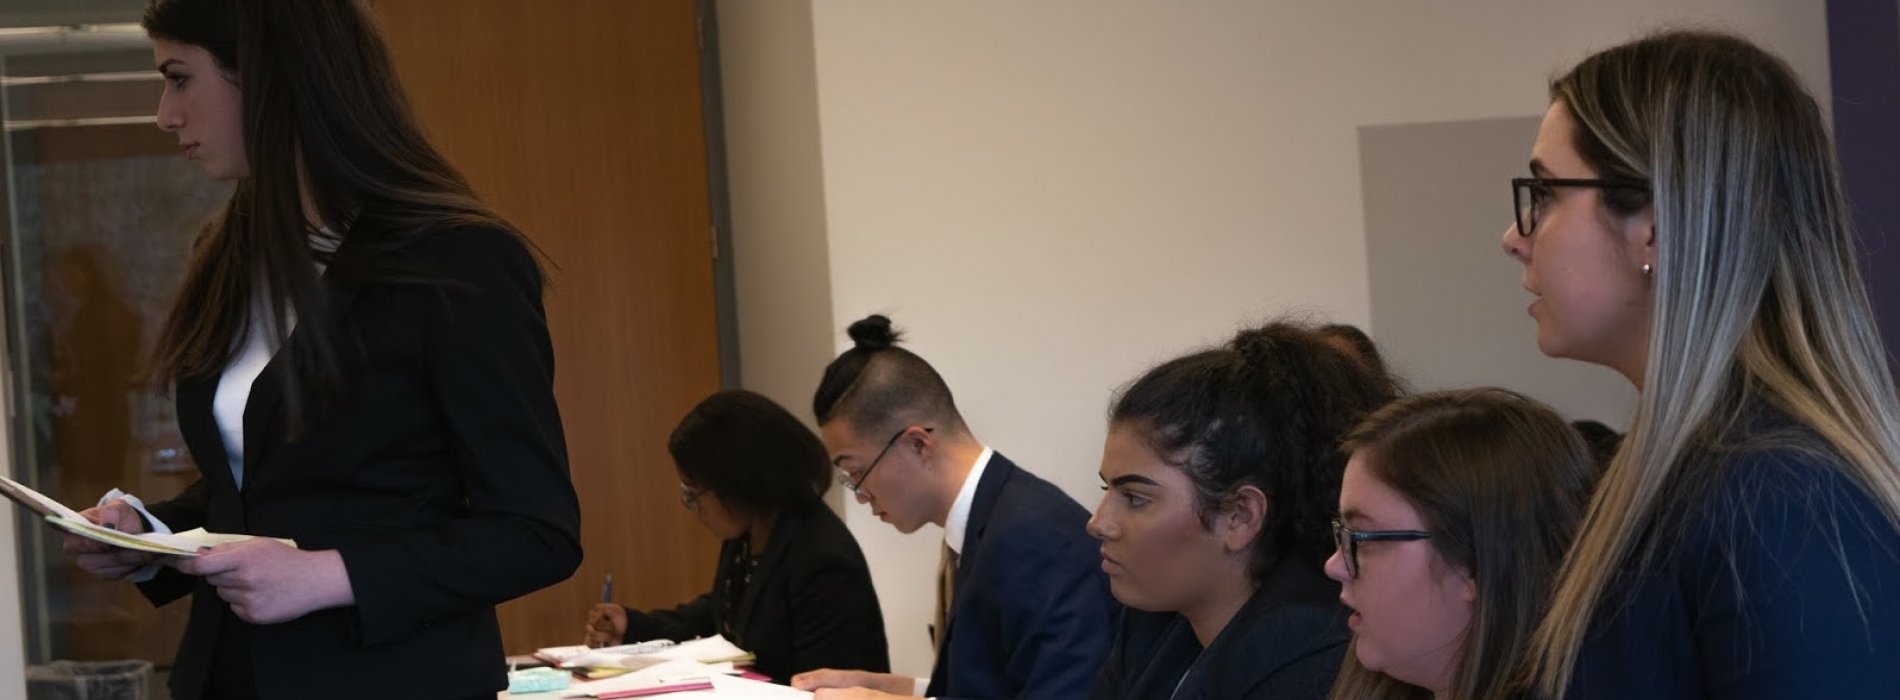 Students working together at Mock Trial